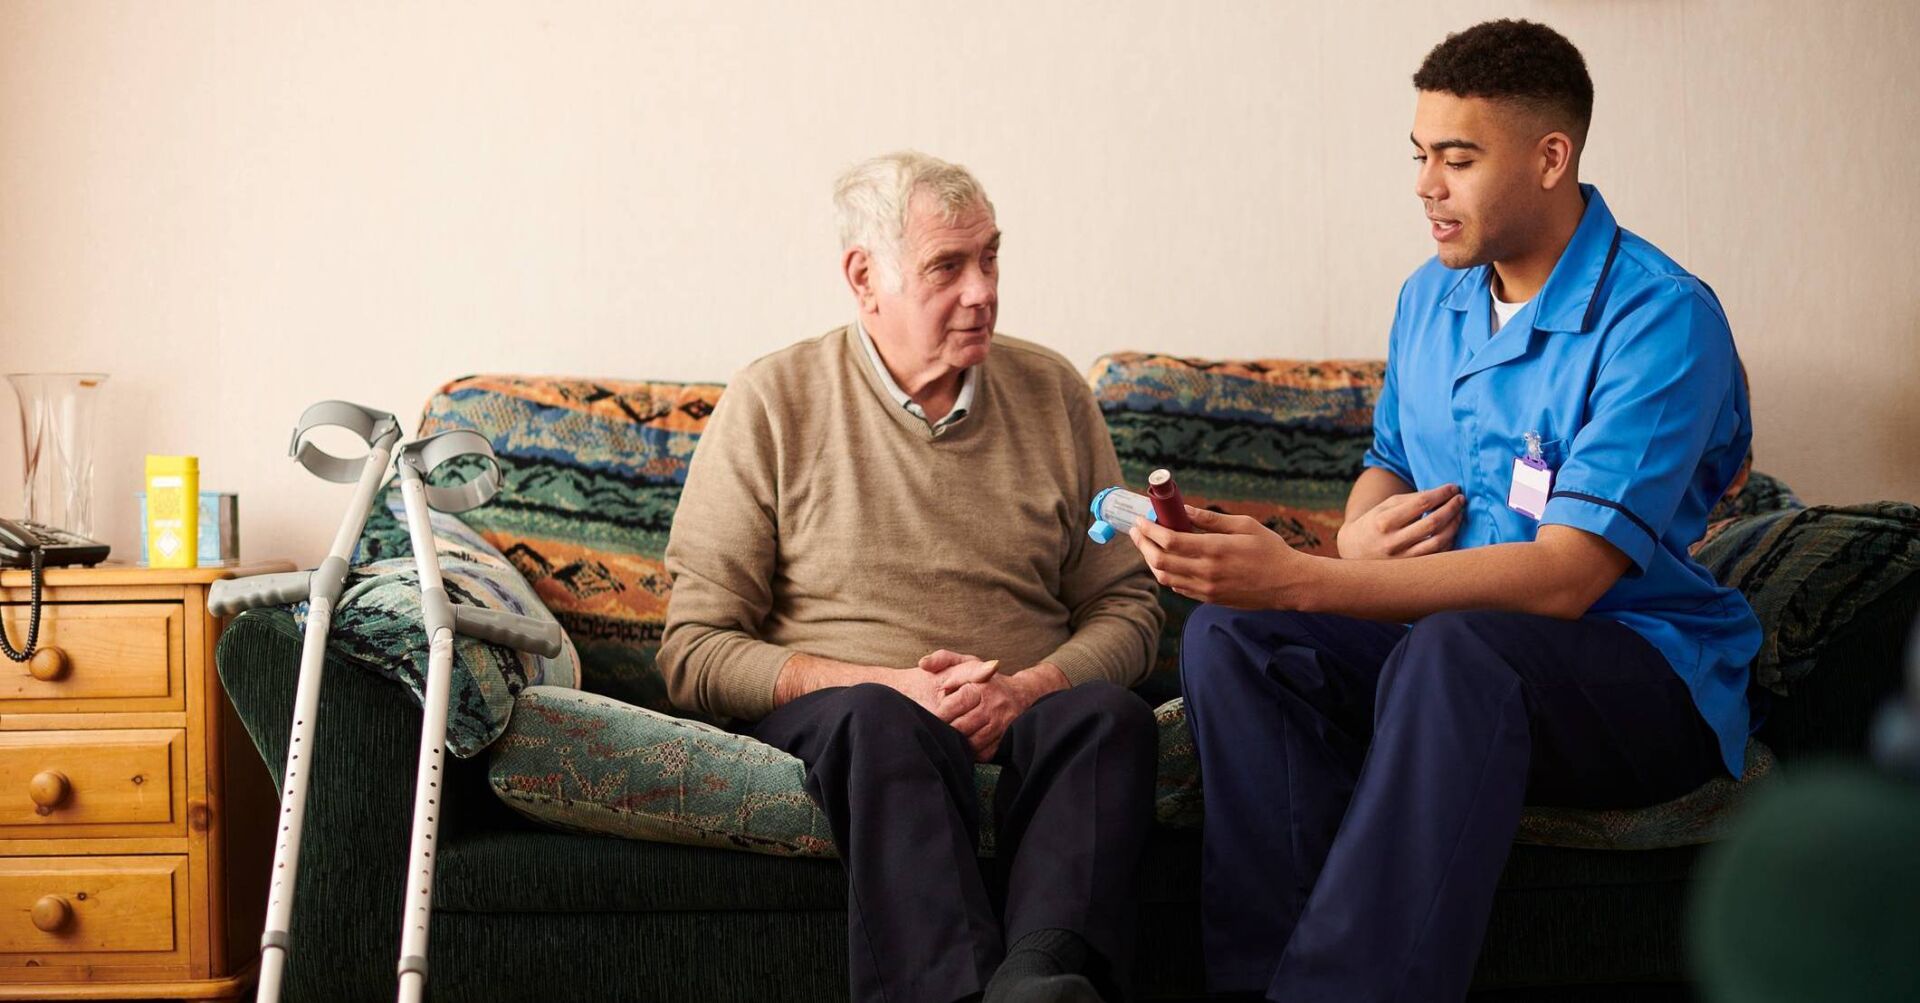 DHSC extends scheme to tackle ‘rising unethical recruitment’ in social care